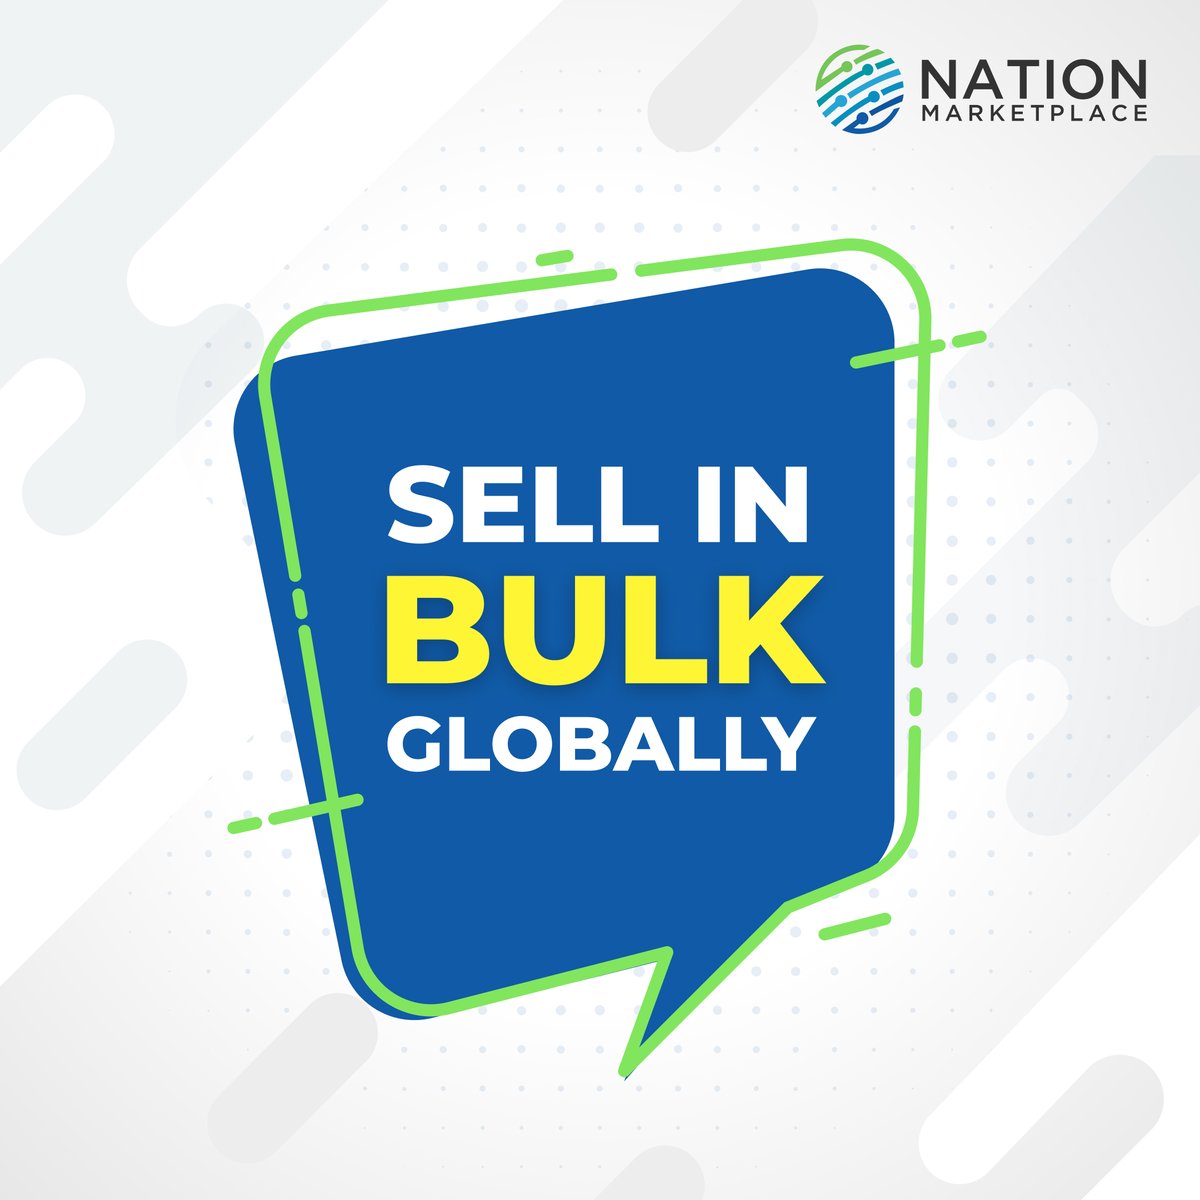 Sell in bulk to US Market. Join Nation Marketplace!
#globalmarketplace #usamarketplace #b2bbusiness #marketplace #nationmarketplace #b2bsource #sourcing #highqualityproduct #manufacturer #globalsourcing #business #entrepreneur